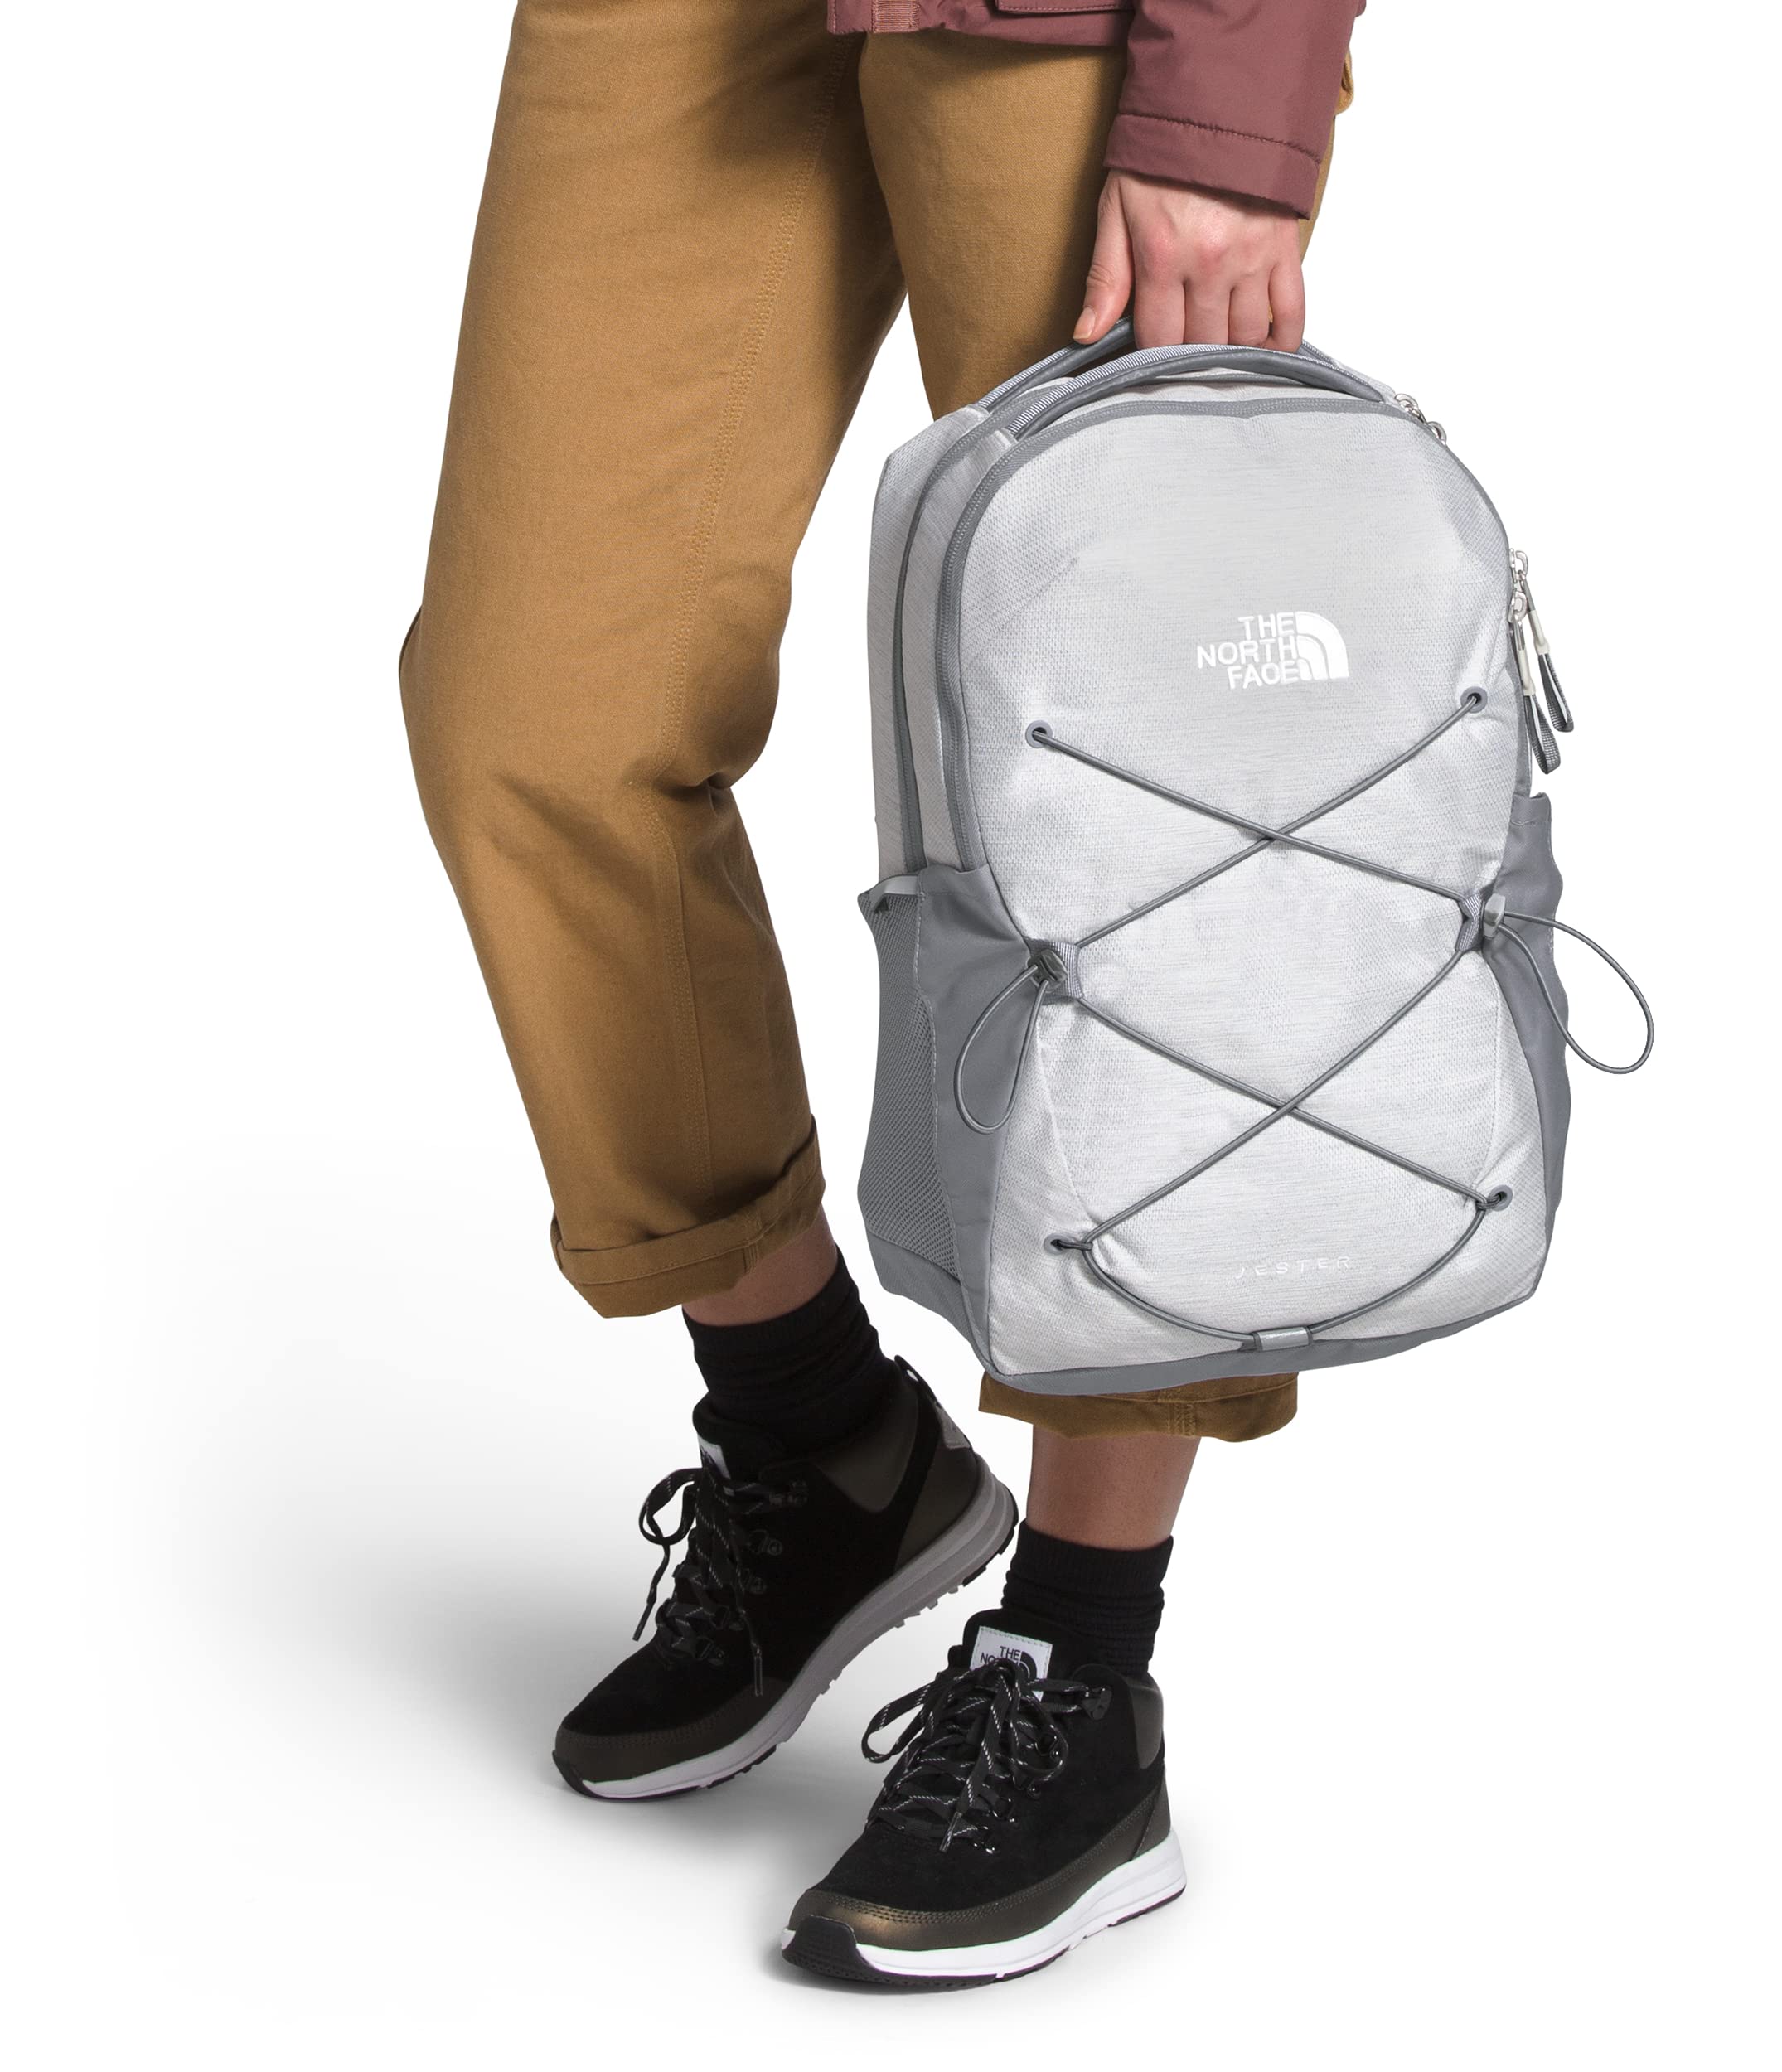 THE NORTH FACE Women's Jester Commuter Laptop Backpack, TNF White Metallic Mélange/Mid Grey, One Size